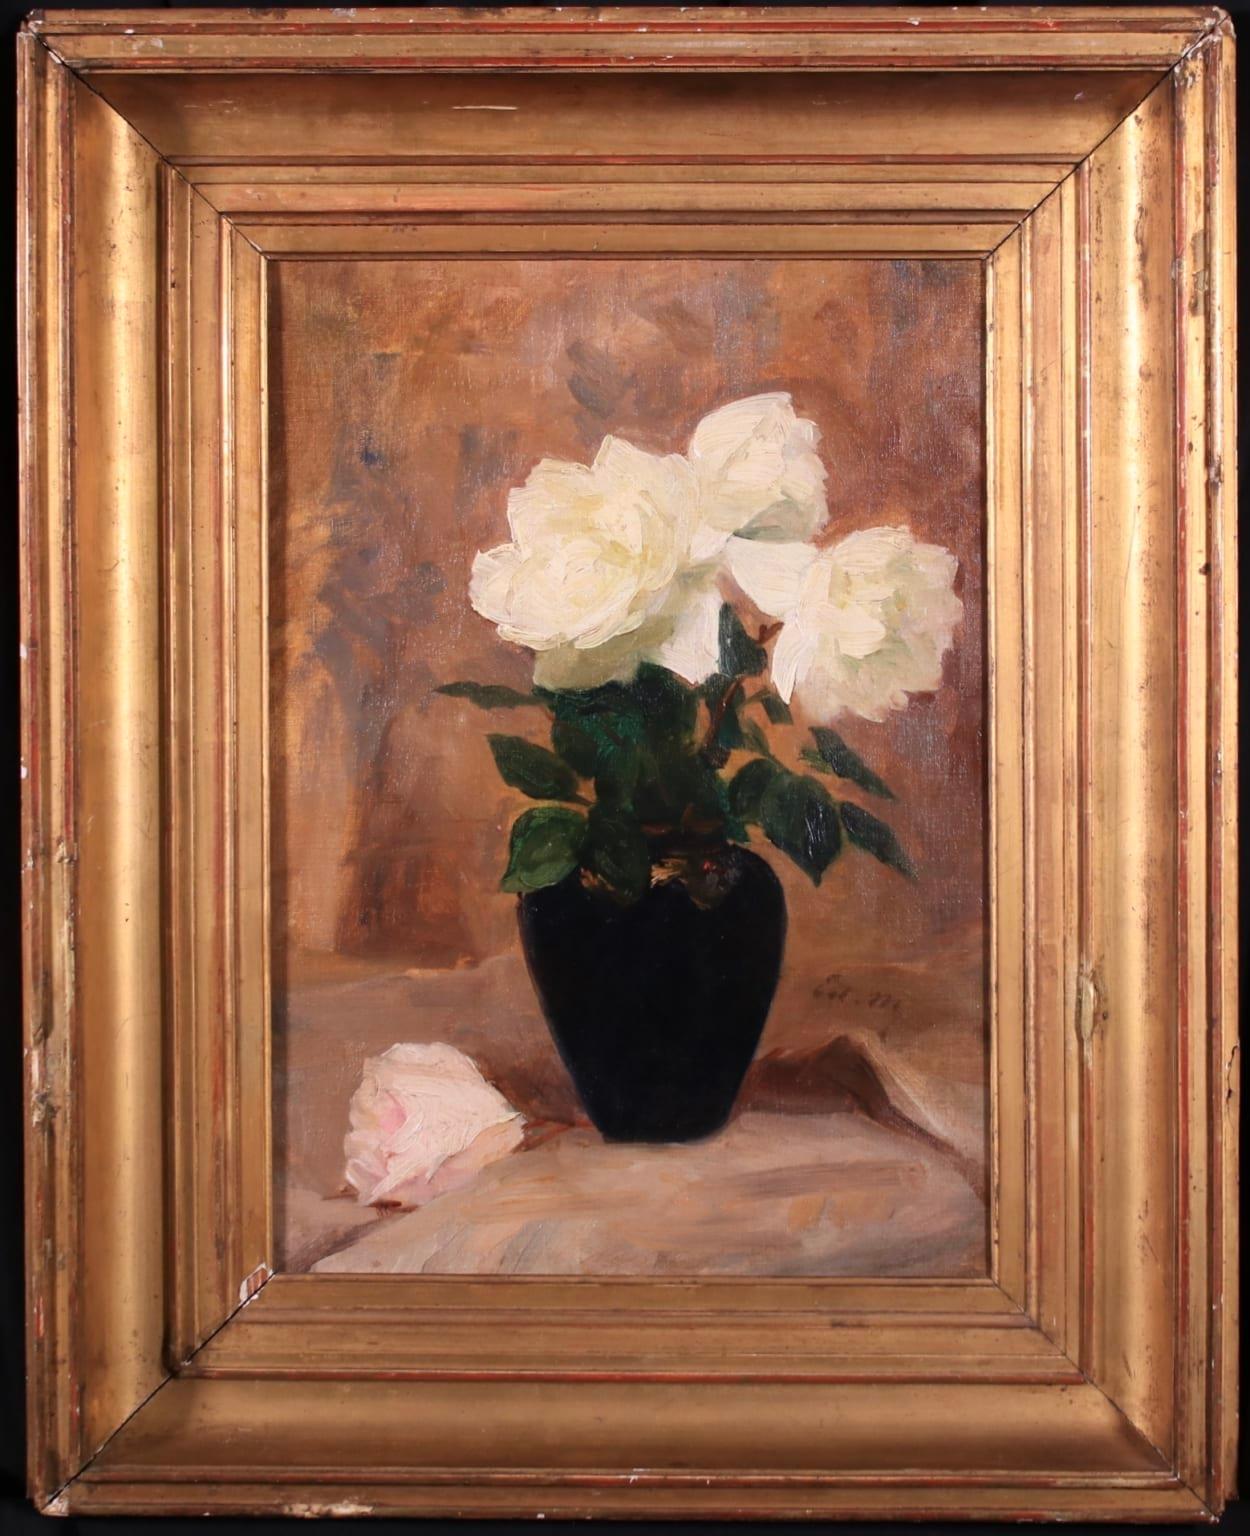 Roses Blanches - Impressionist Oil, Still Life White Flowers, Circle of E Manet - Painting by Edouard Manet